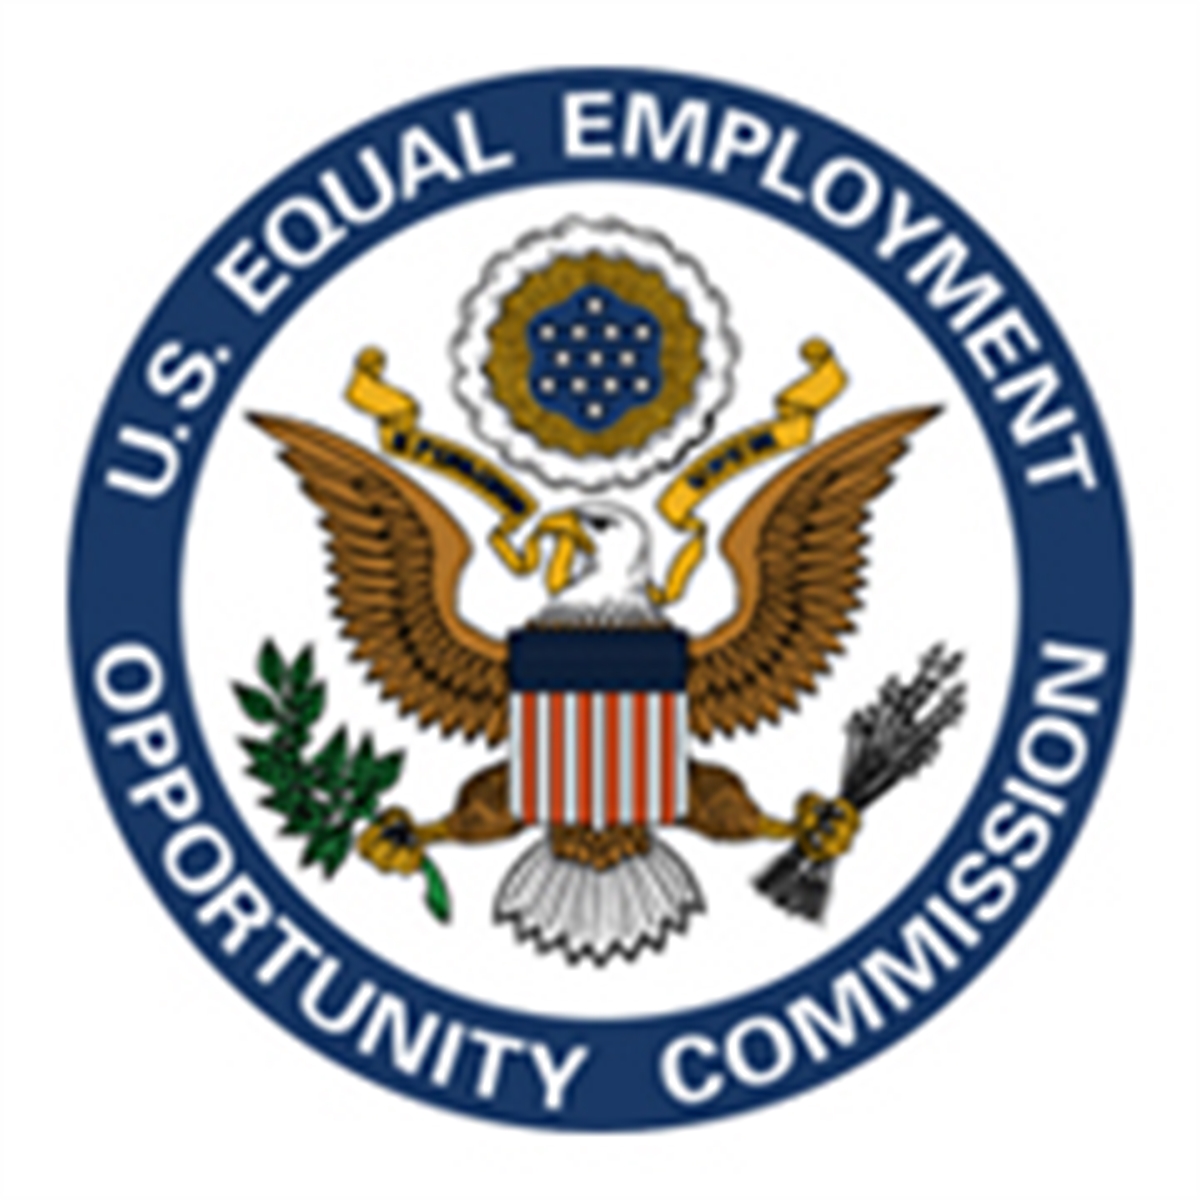 EEOC Sues Total Systems Services for Disability Discrimination and Retaliation | U.S. Equal Employment Opportunity Commission (EEOC) - JDSupra